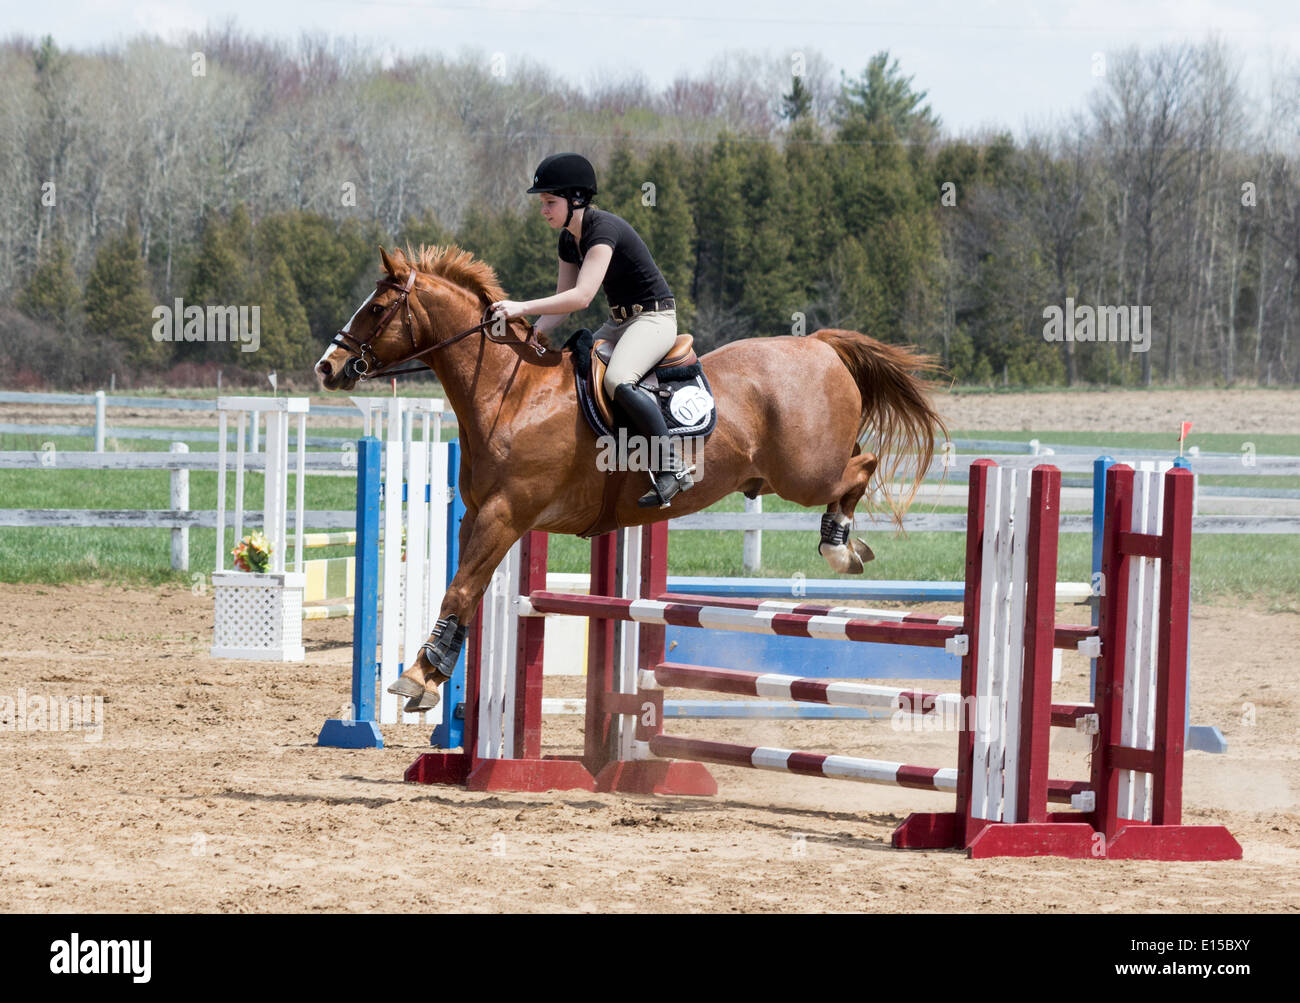 Teenage girl rider on chestnut horse jumping over oxer spread jump at local schooling horse show Stock Photo